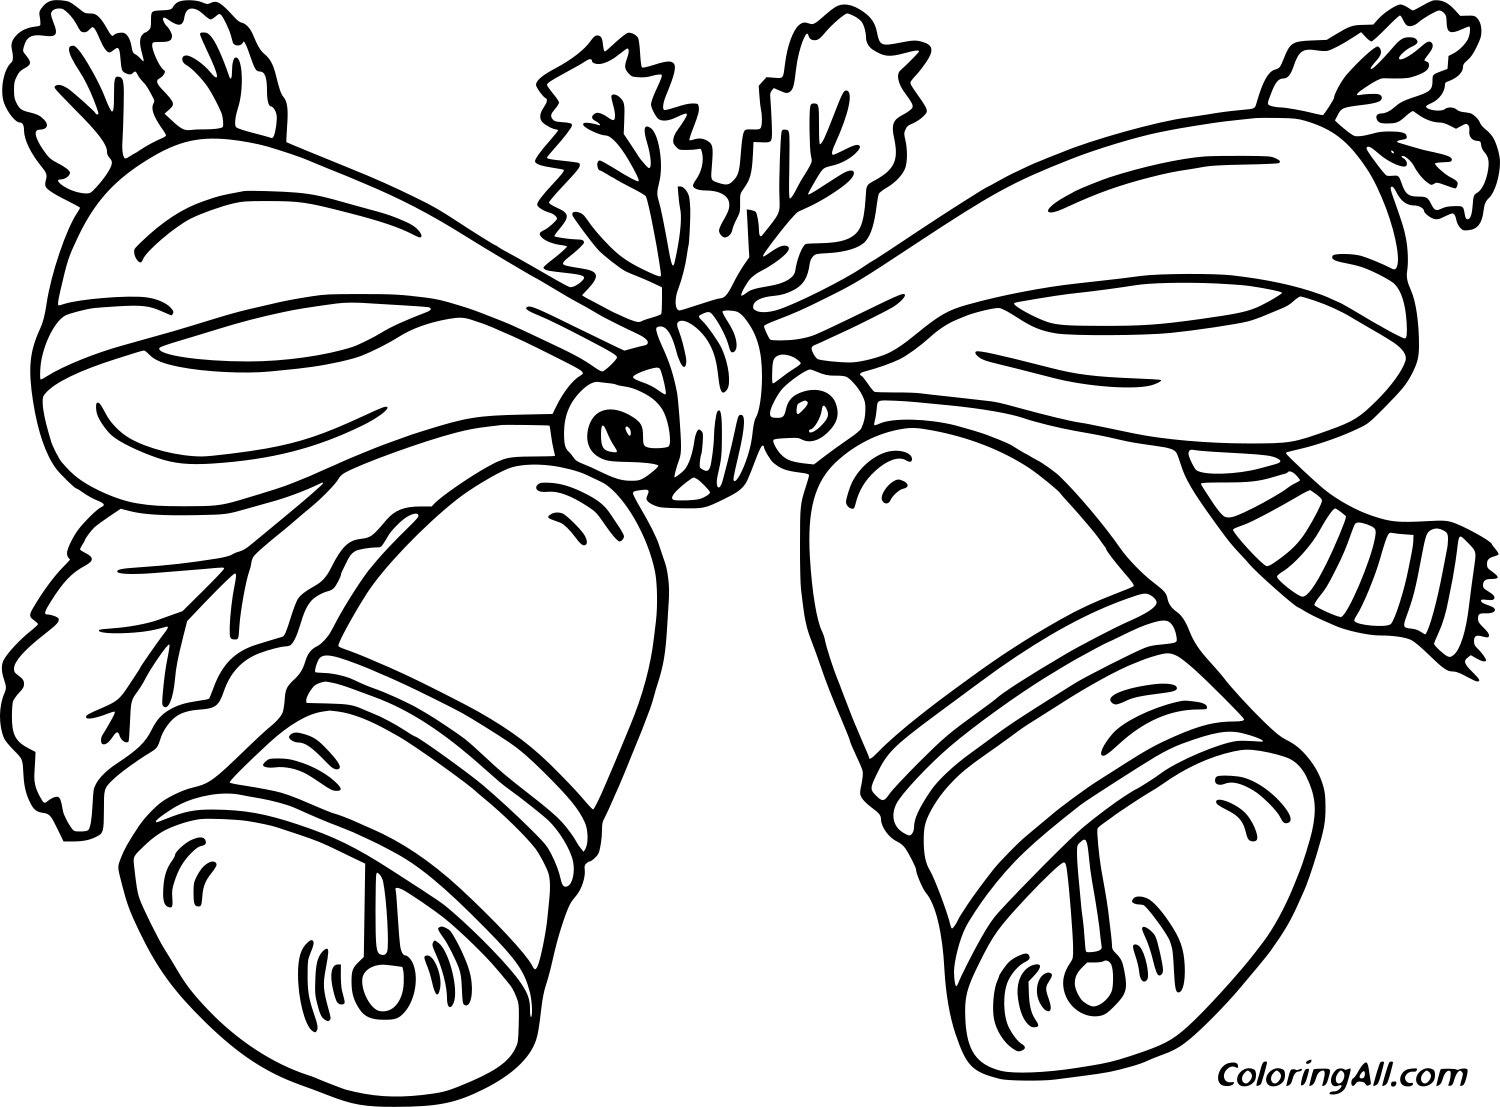 Two Ringing Bells And Holly Image For Kids Coloring Page